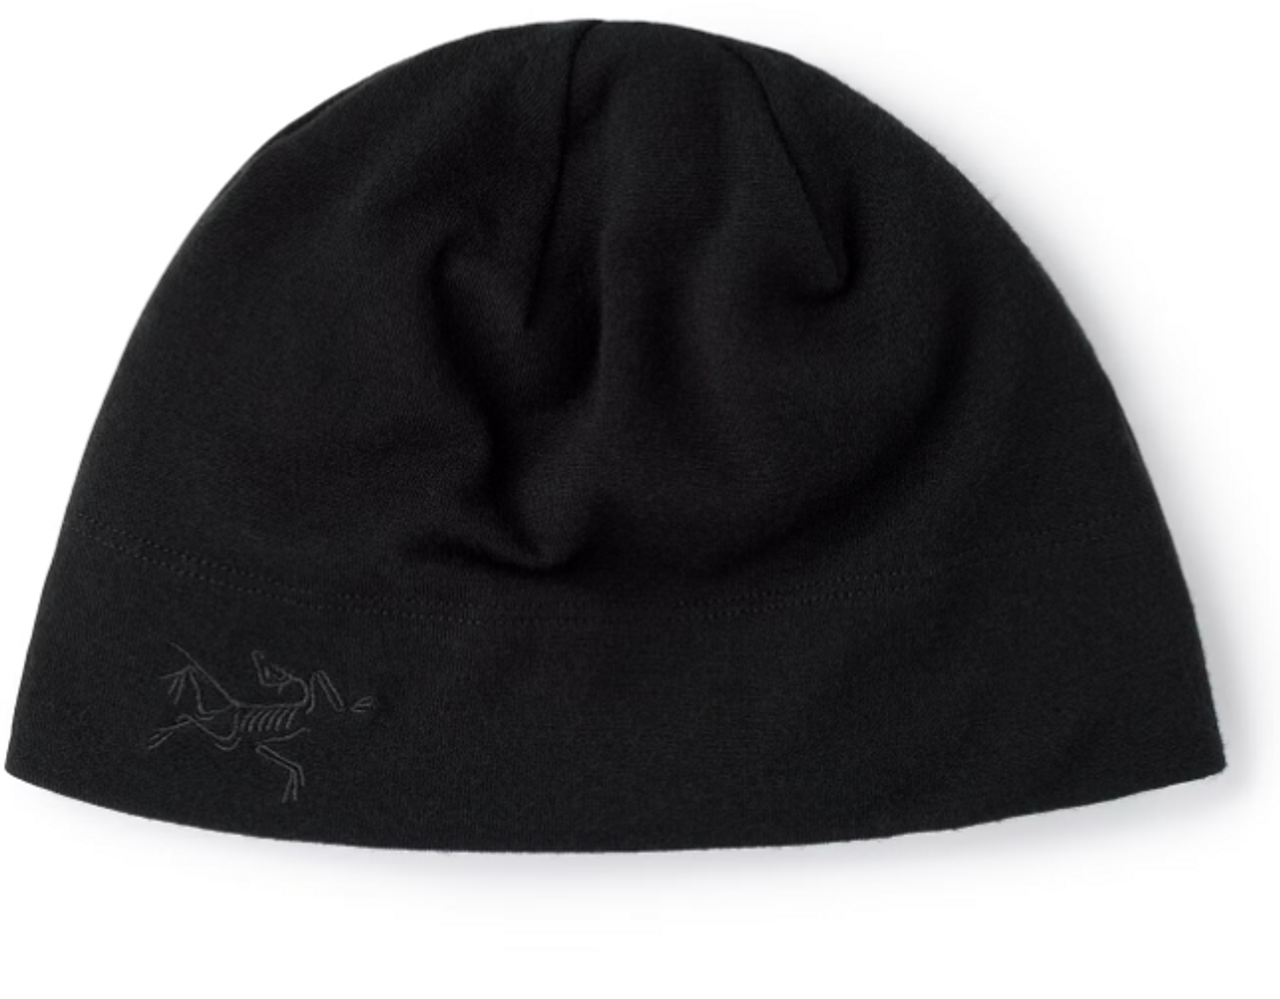 ArcTeryx Cold Wx Beanie AR Wool buy with delivery to the USA